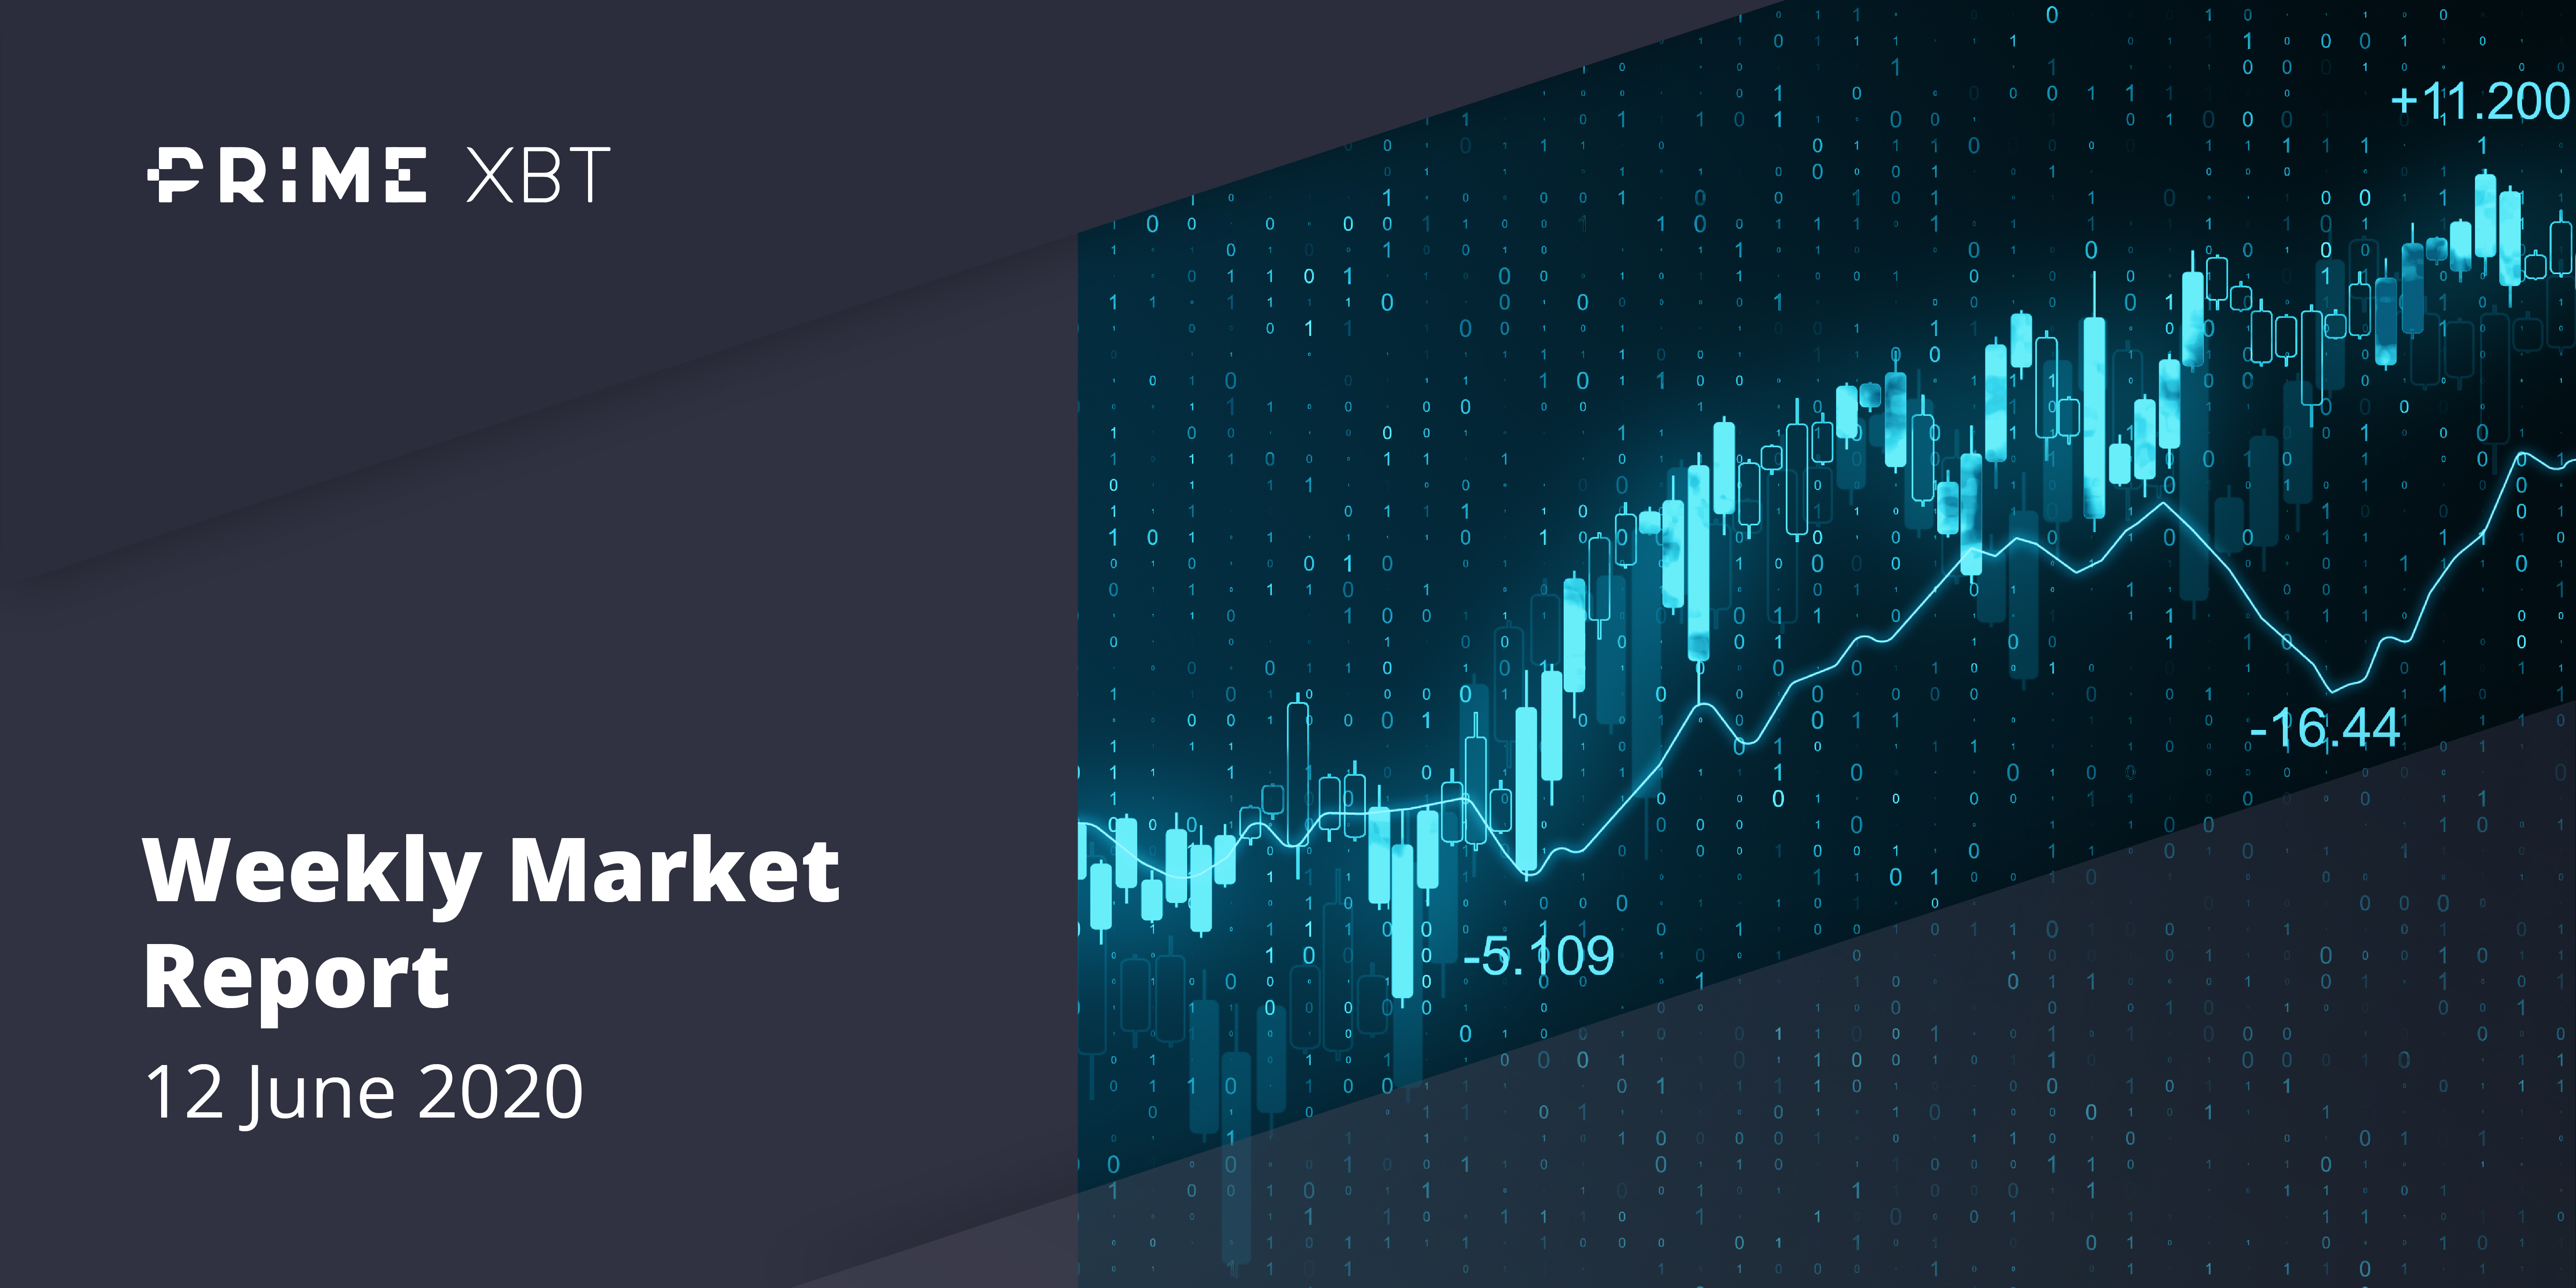 Crypto Market Report: Sideways BTC Price Forces Volatility to Year Low, Futures Market Interest Up as Global Markets Pullback - 12.06.20